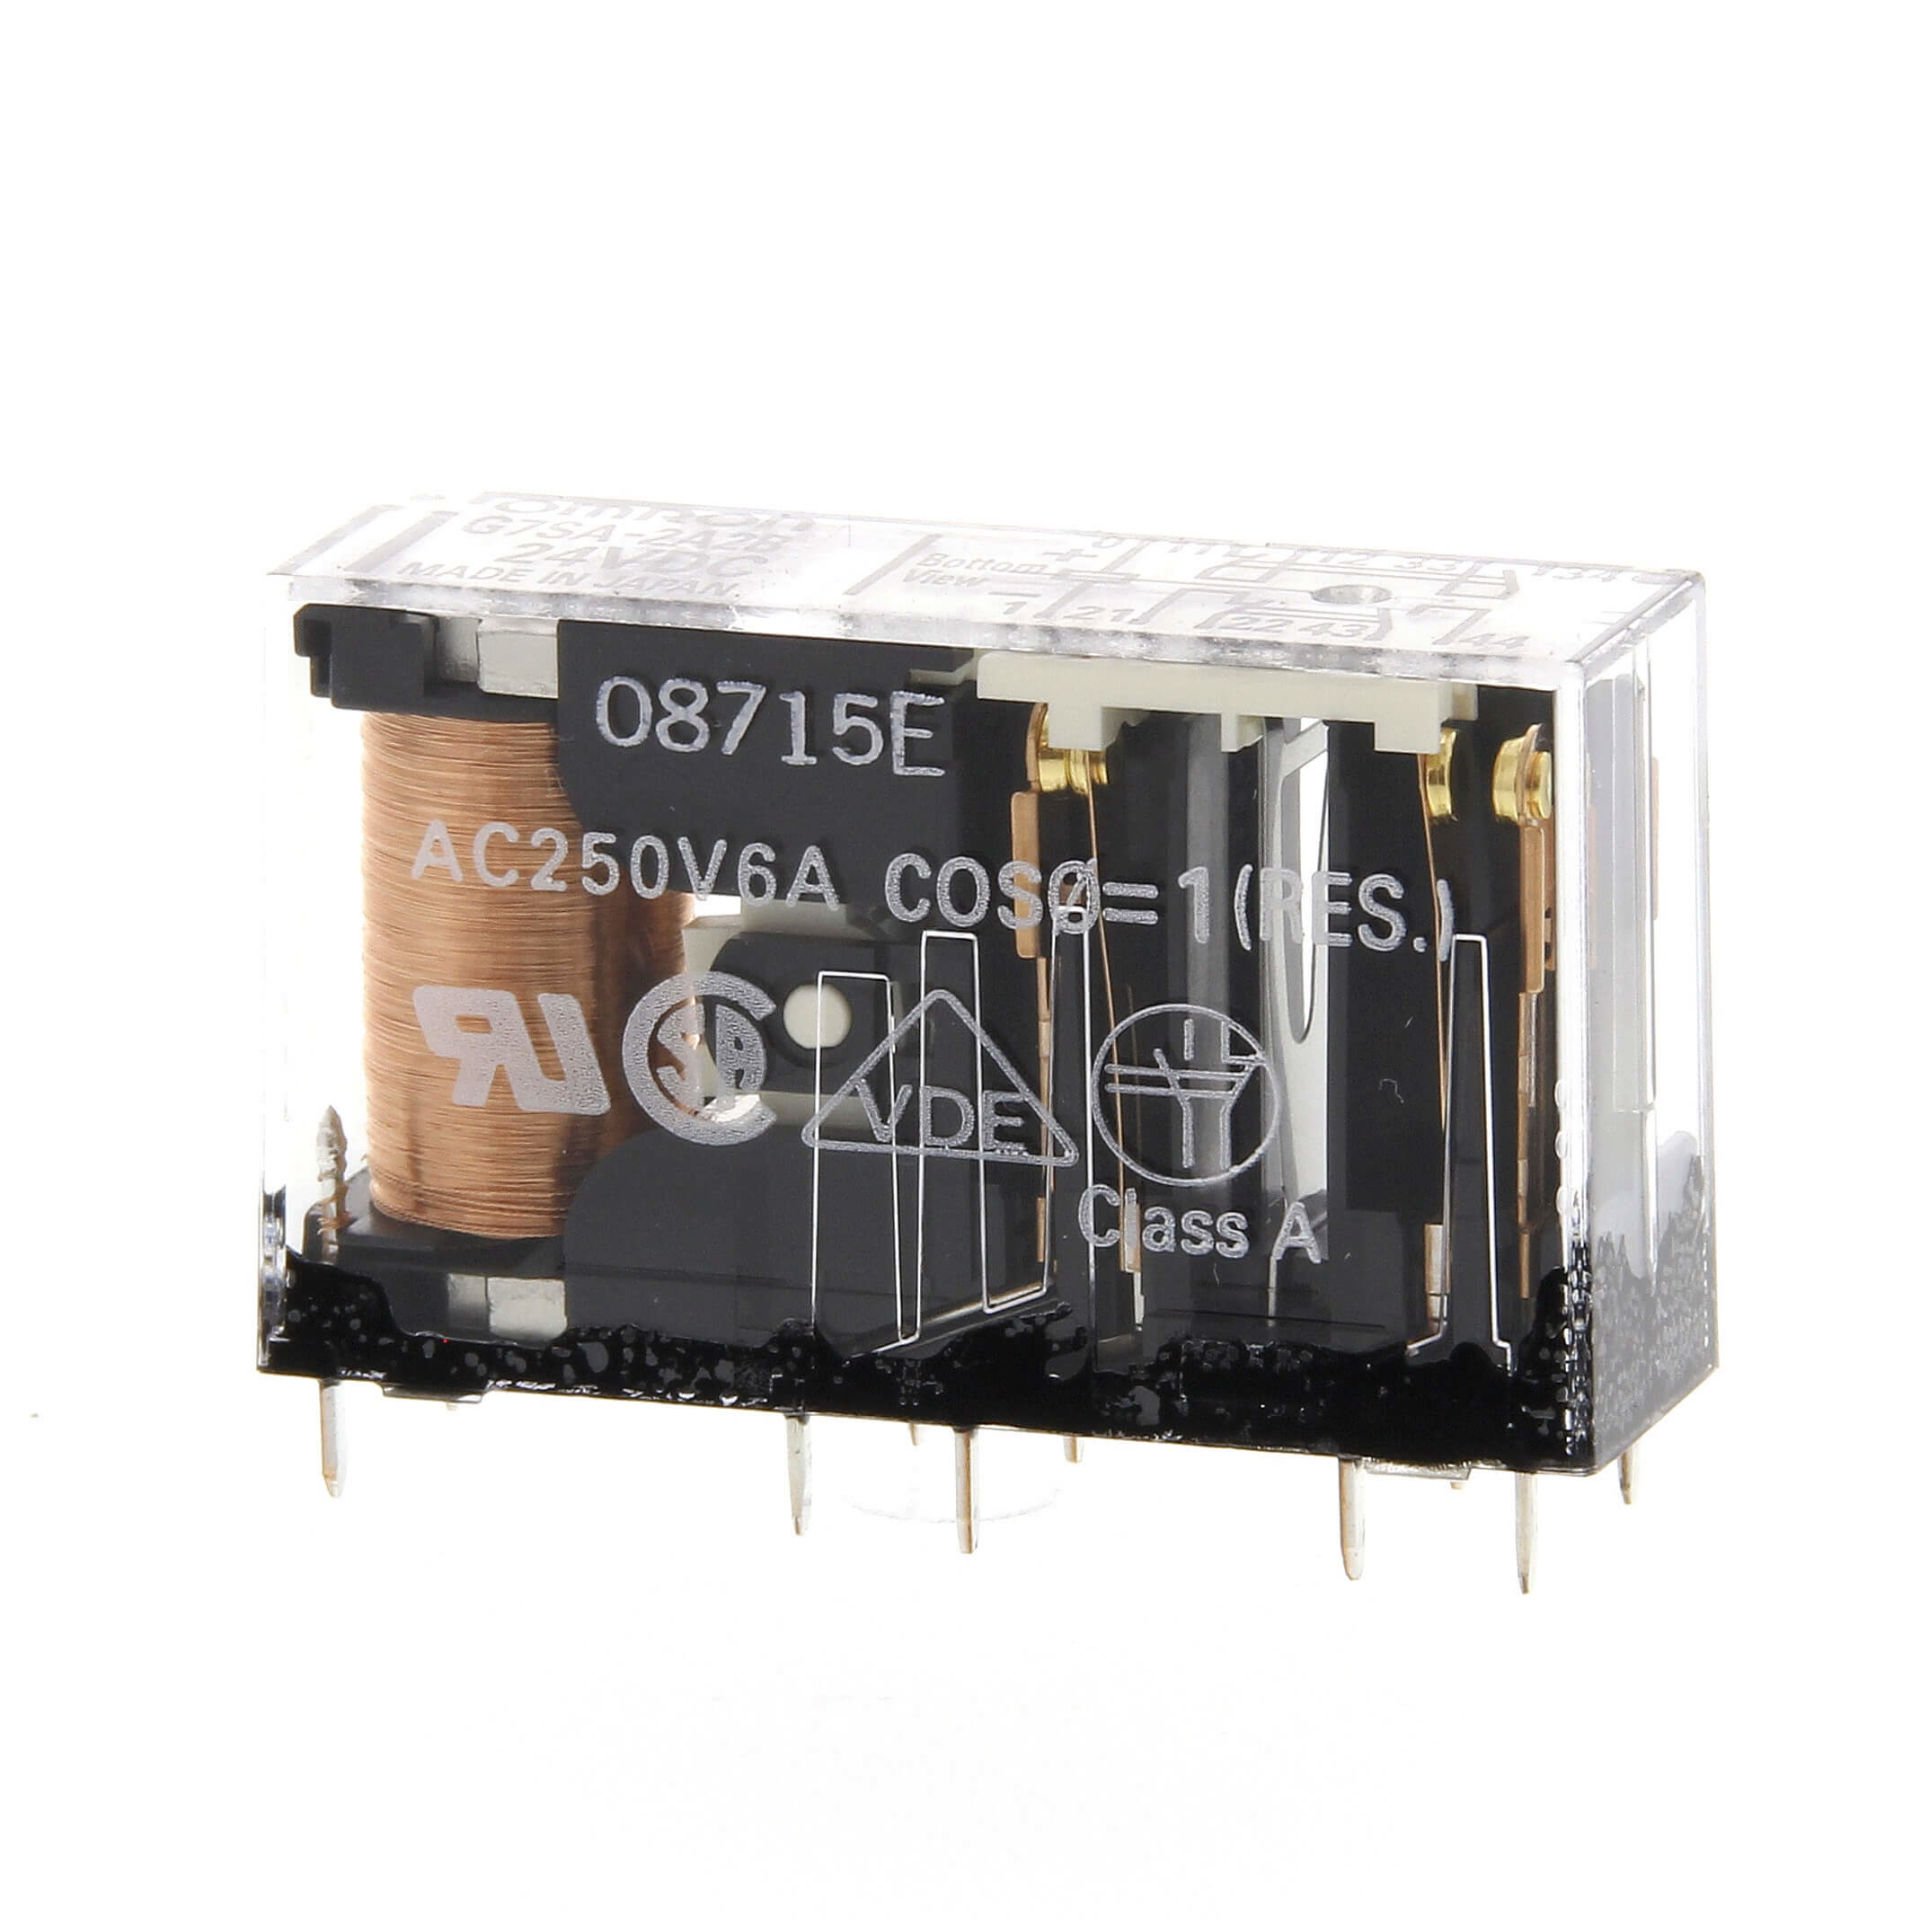 Omron - G7SA-3A3B 48VDC  Safety relay, plug-in, 3PST-NO, 3PST-NC, 6 A, forcibly-guided contacts, 48 VDC